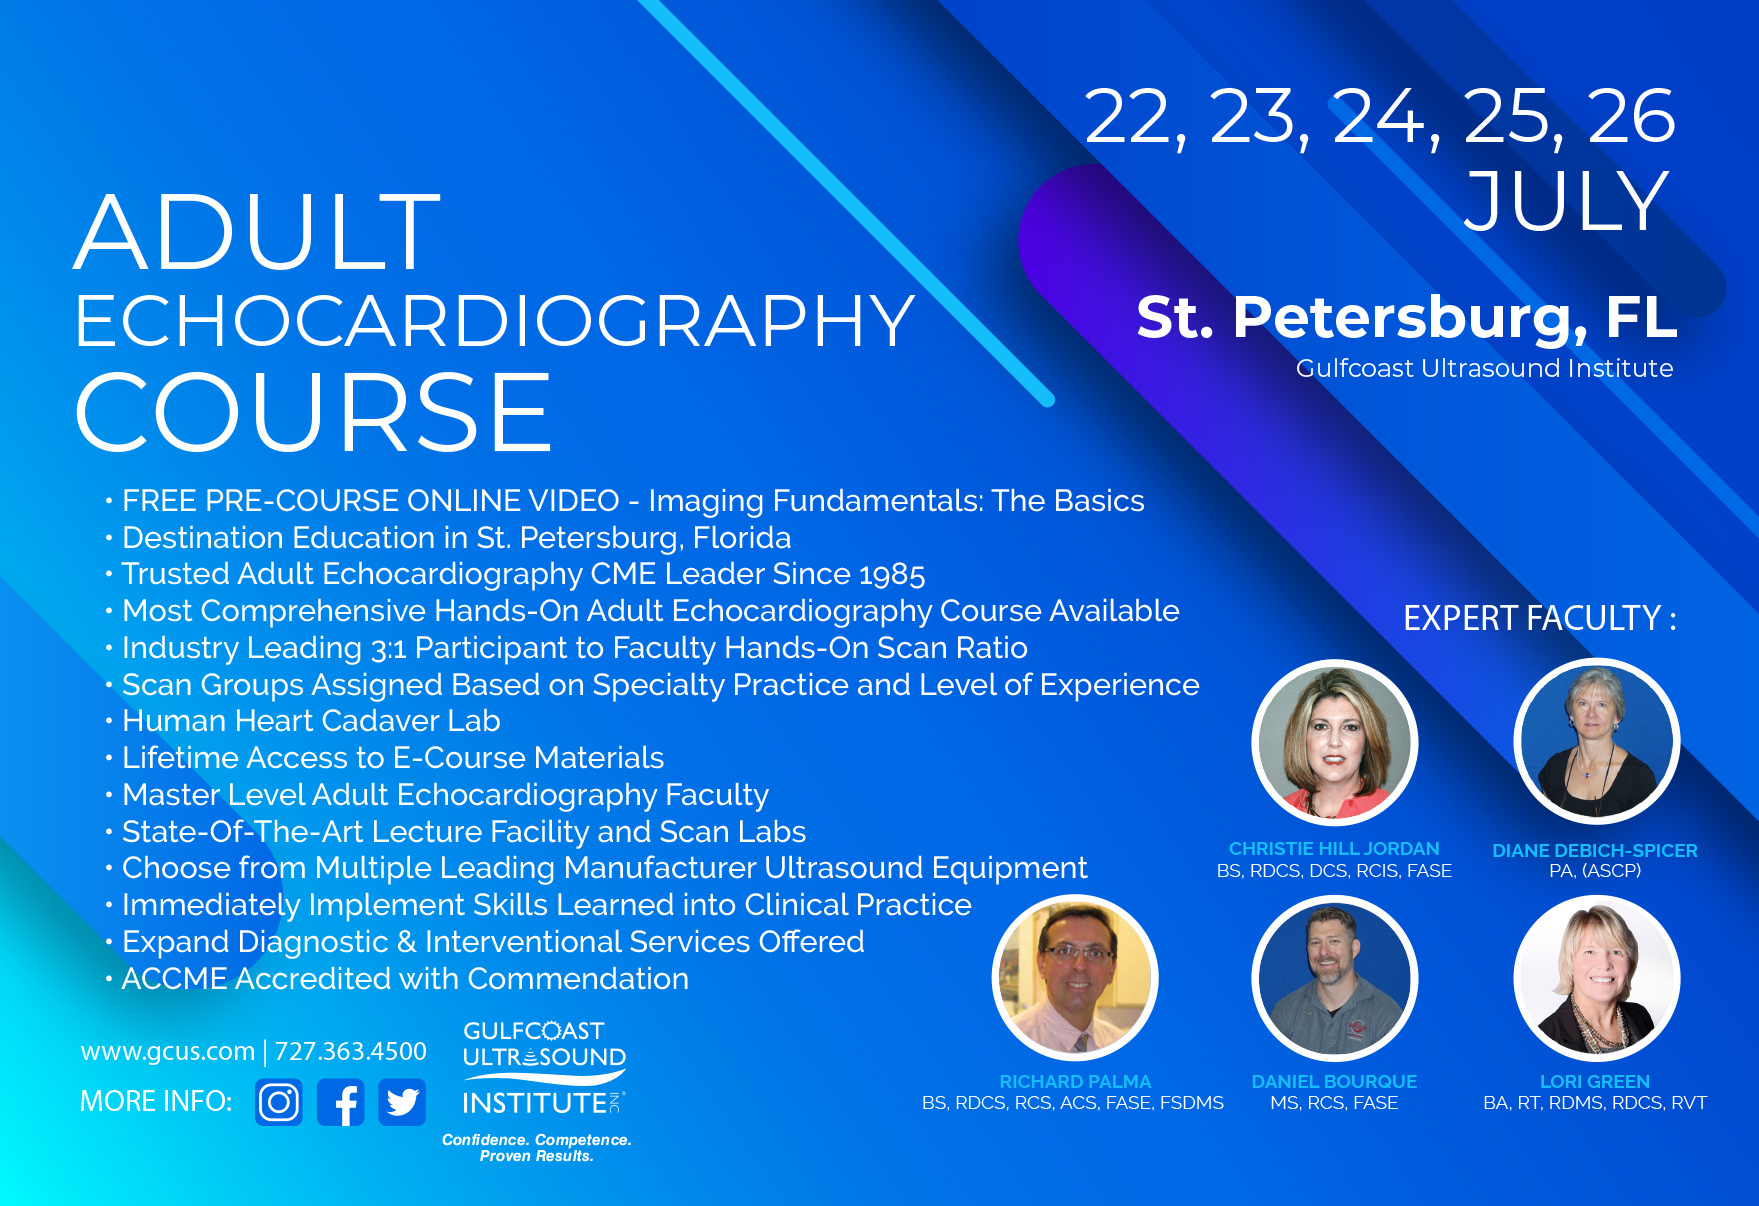 Hands On Adult Echocardiography Course